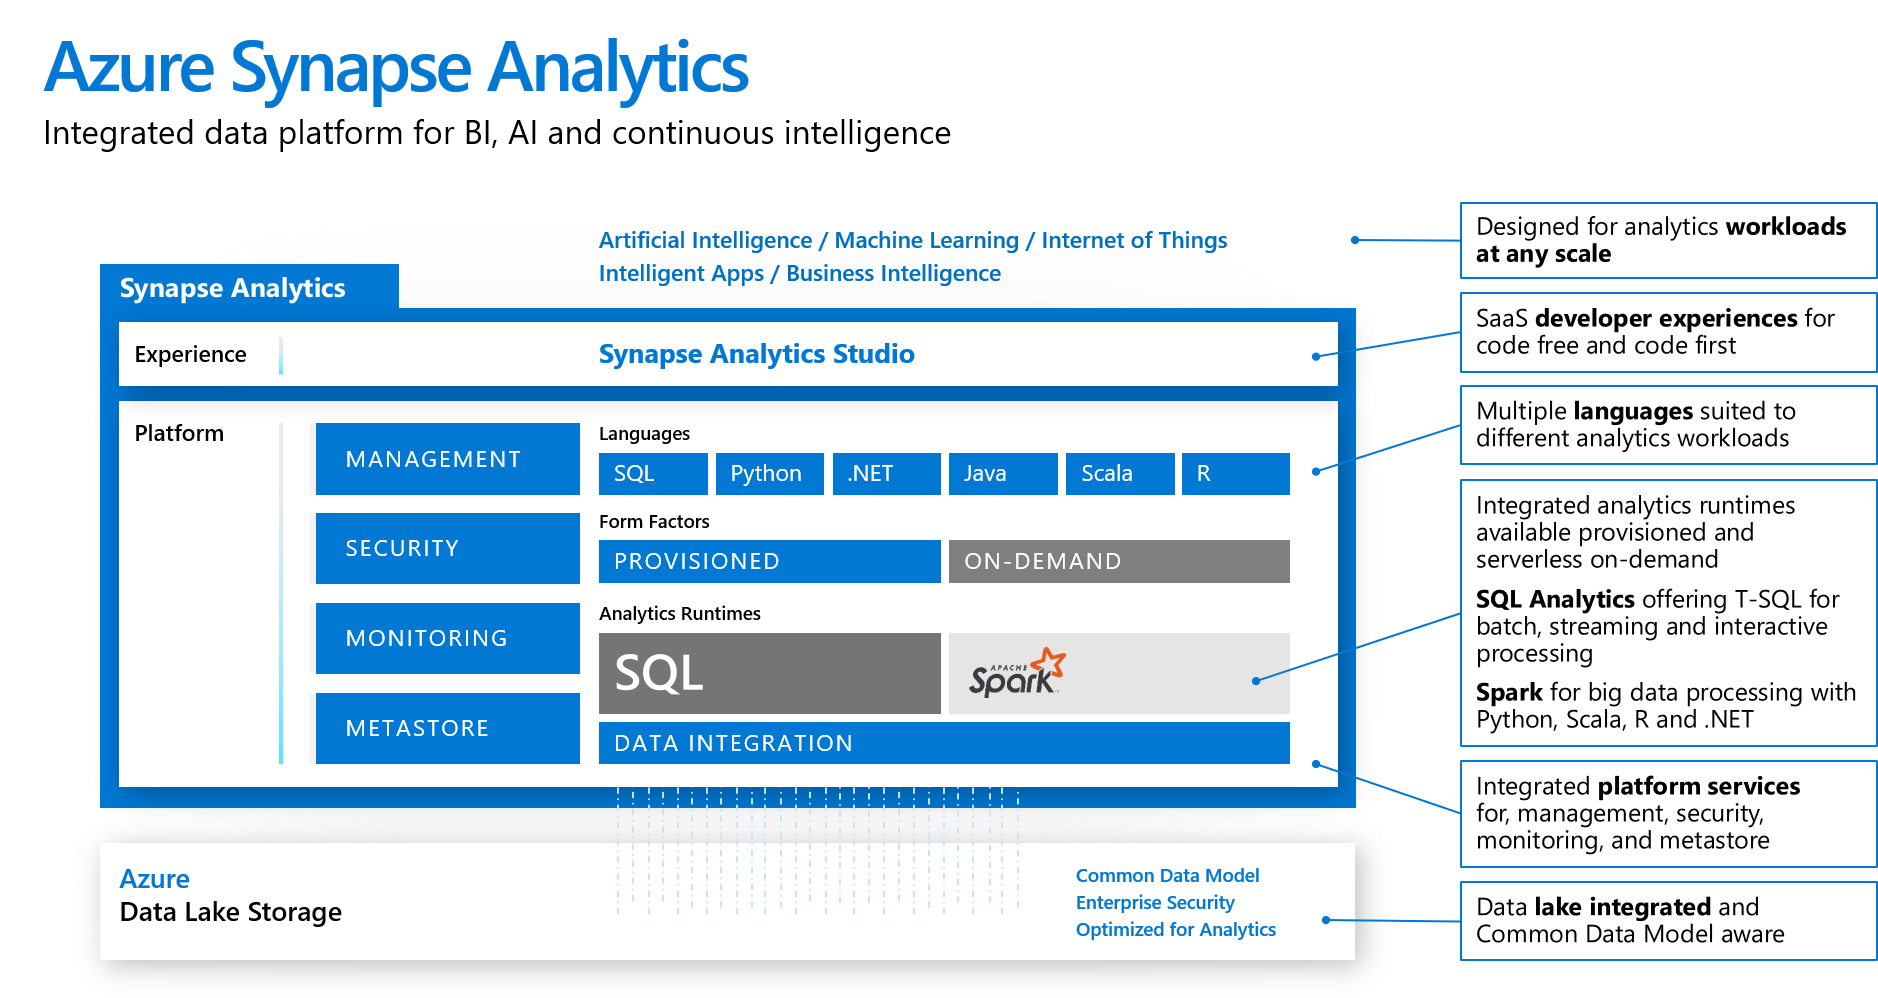 Azure Synapse Analytics for integrated data platform experience, BI, AI, and continuous intelligence as part of your data strategy